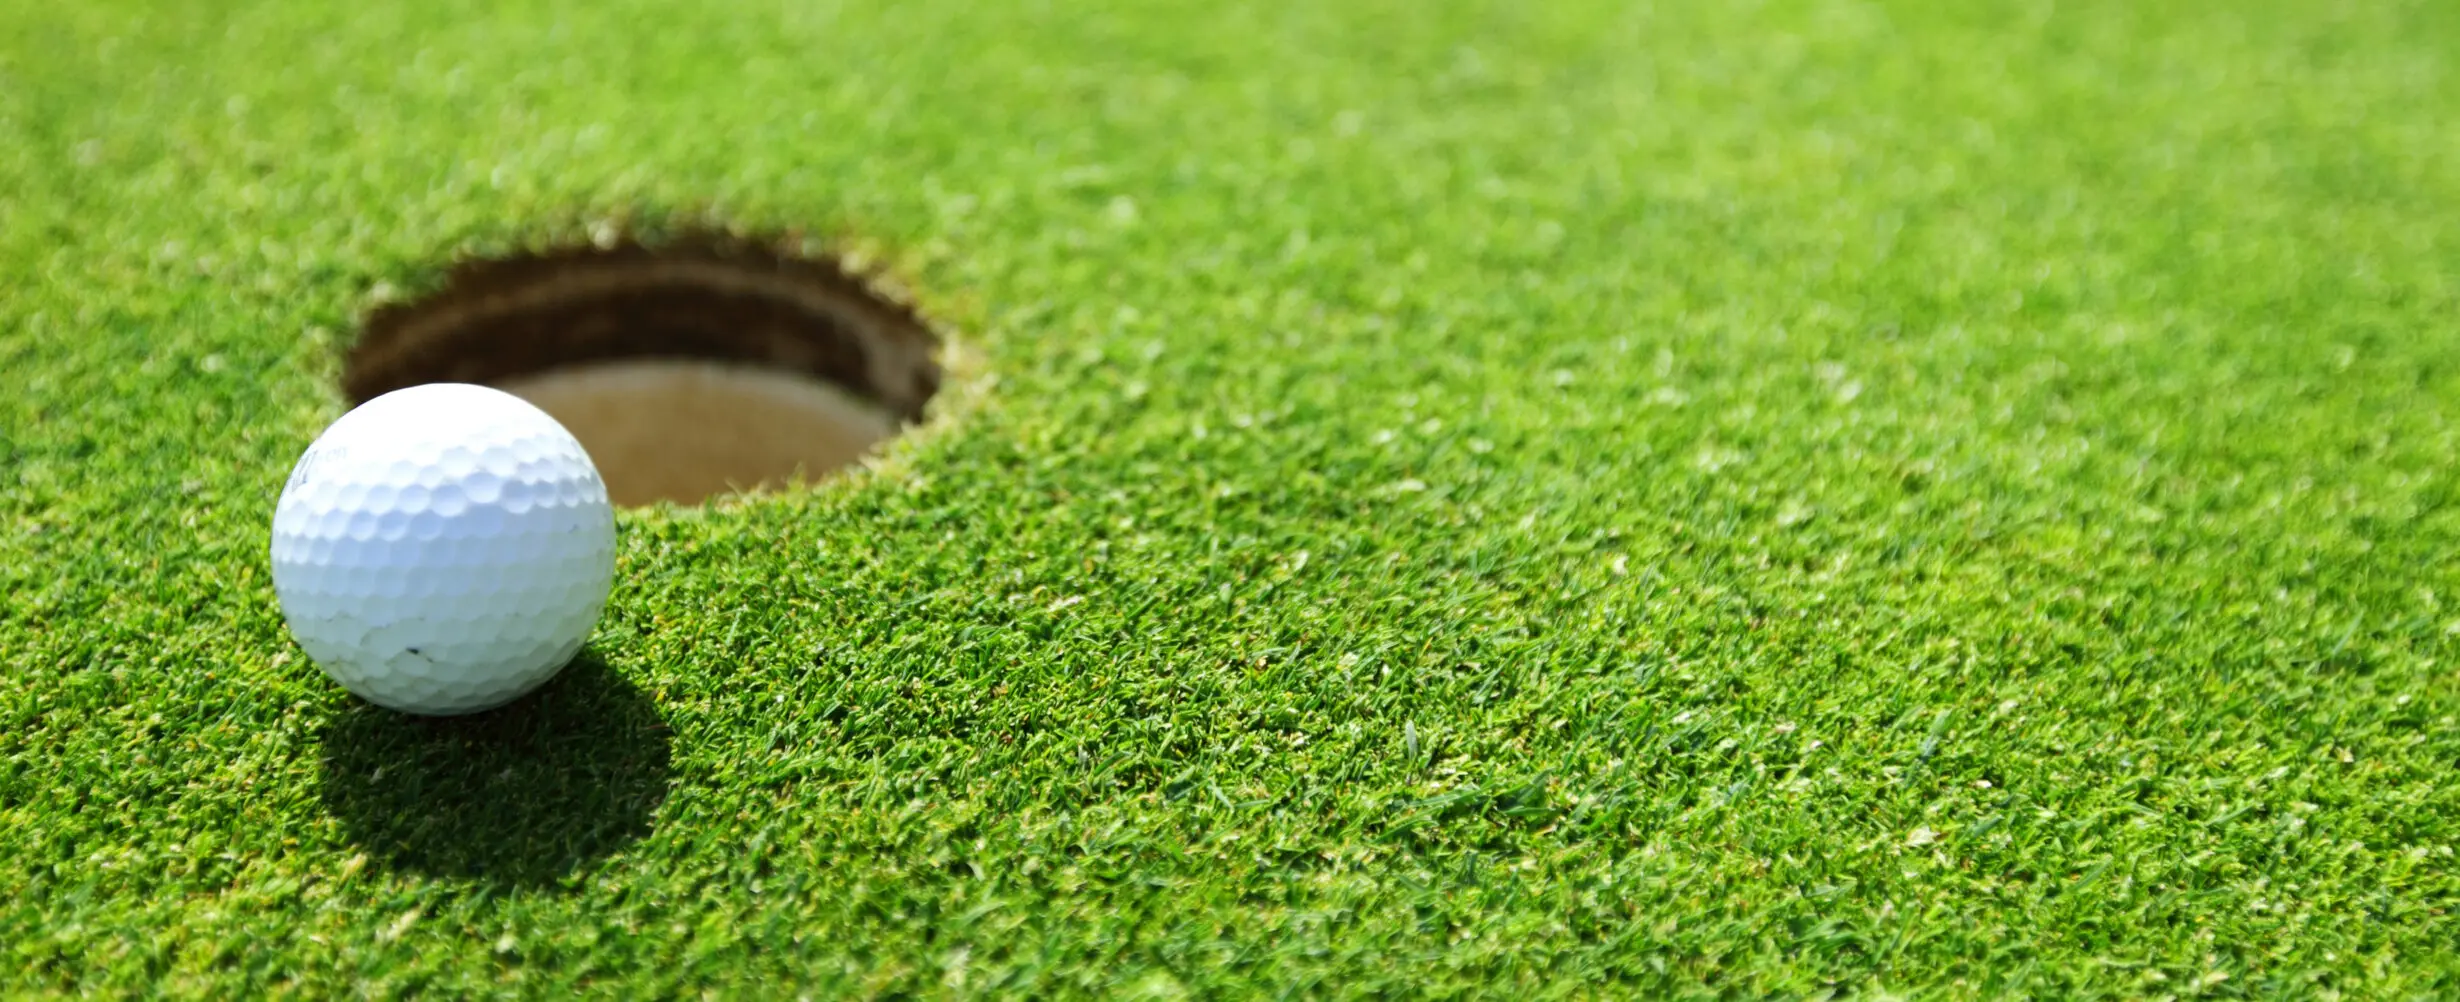 A golf ball on lip of cup close up.